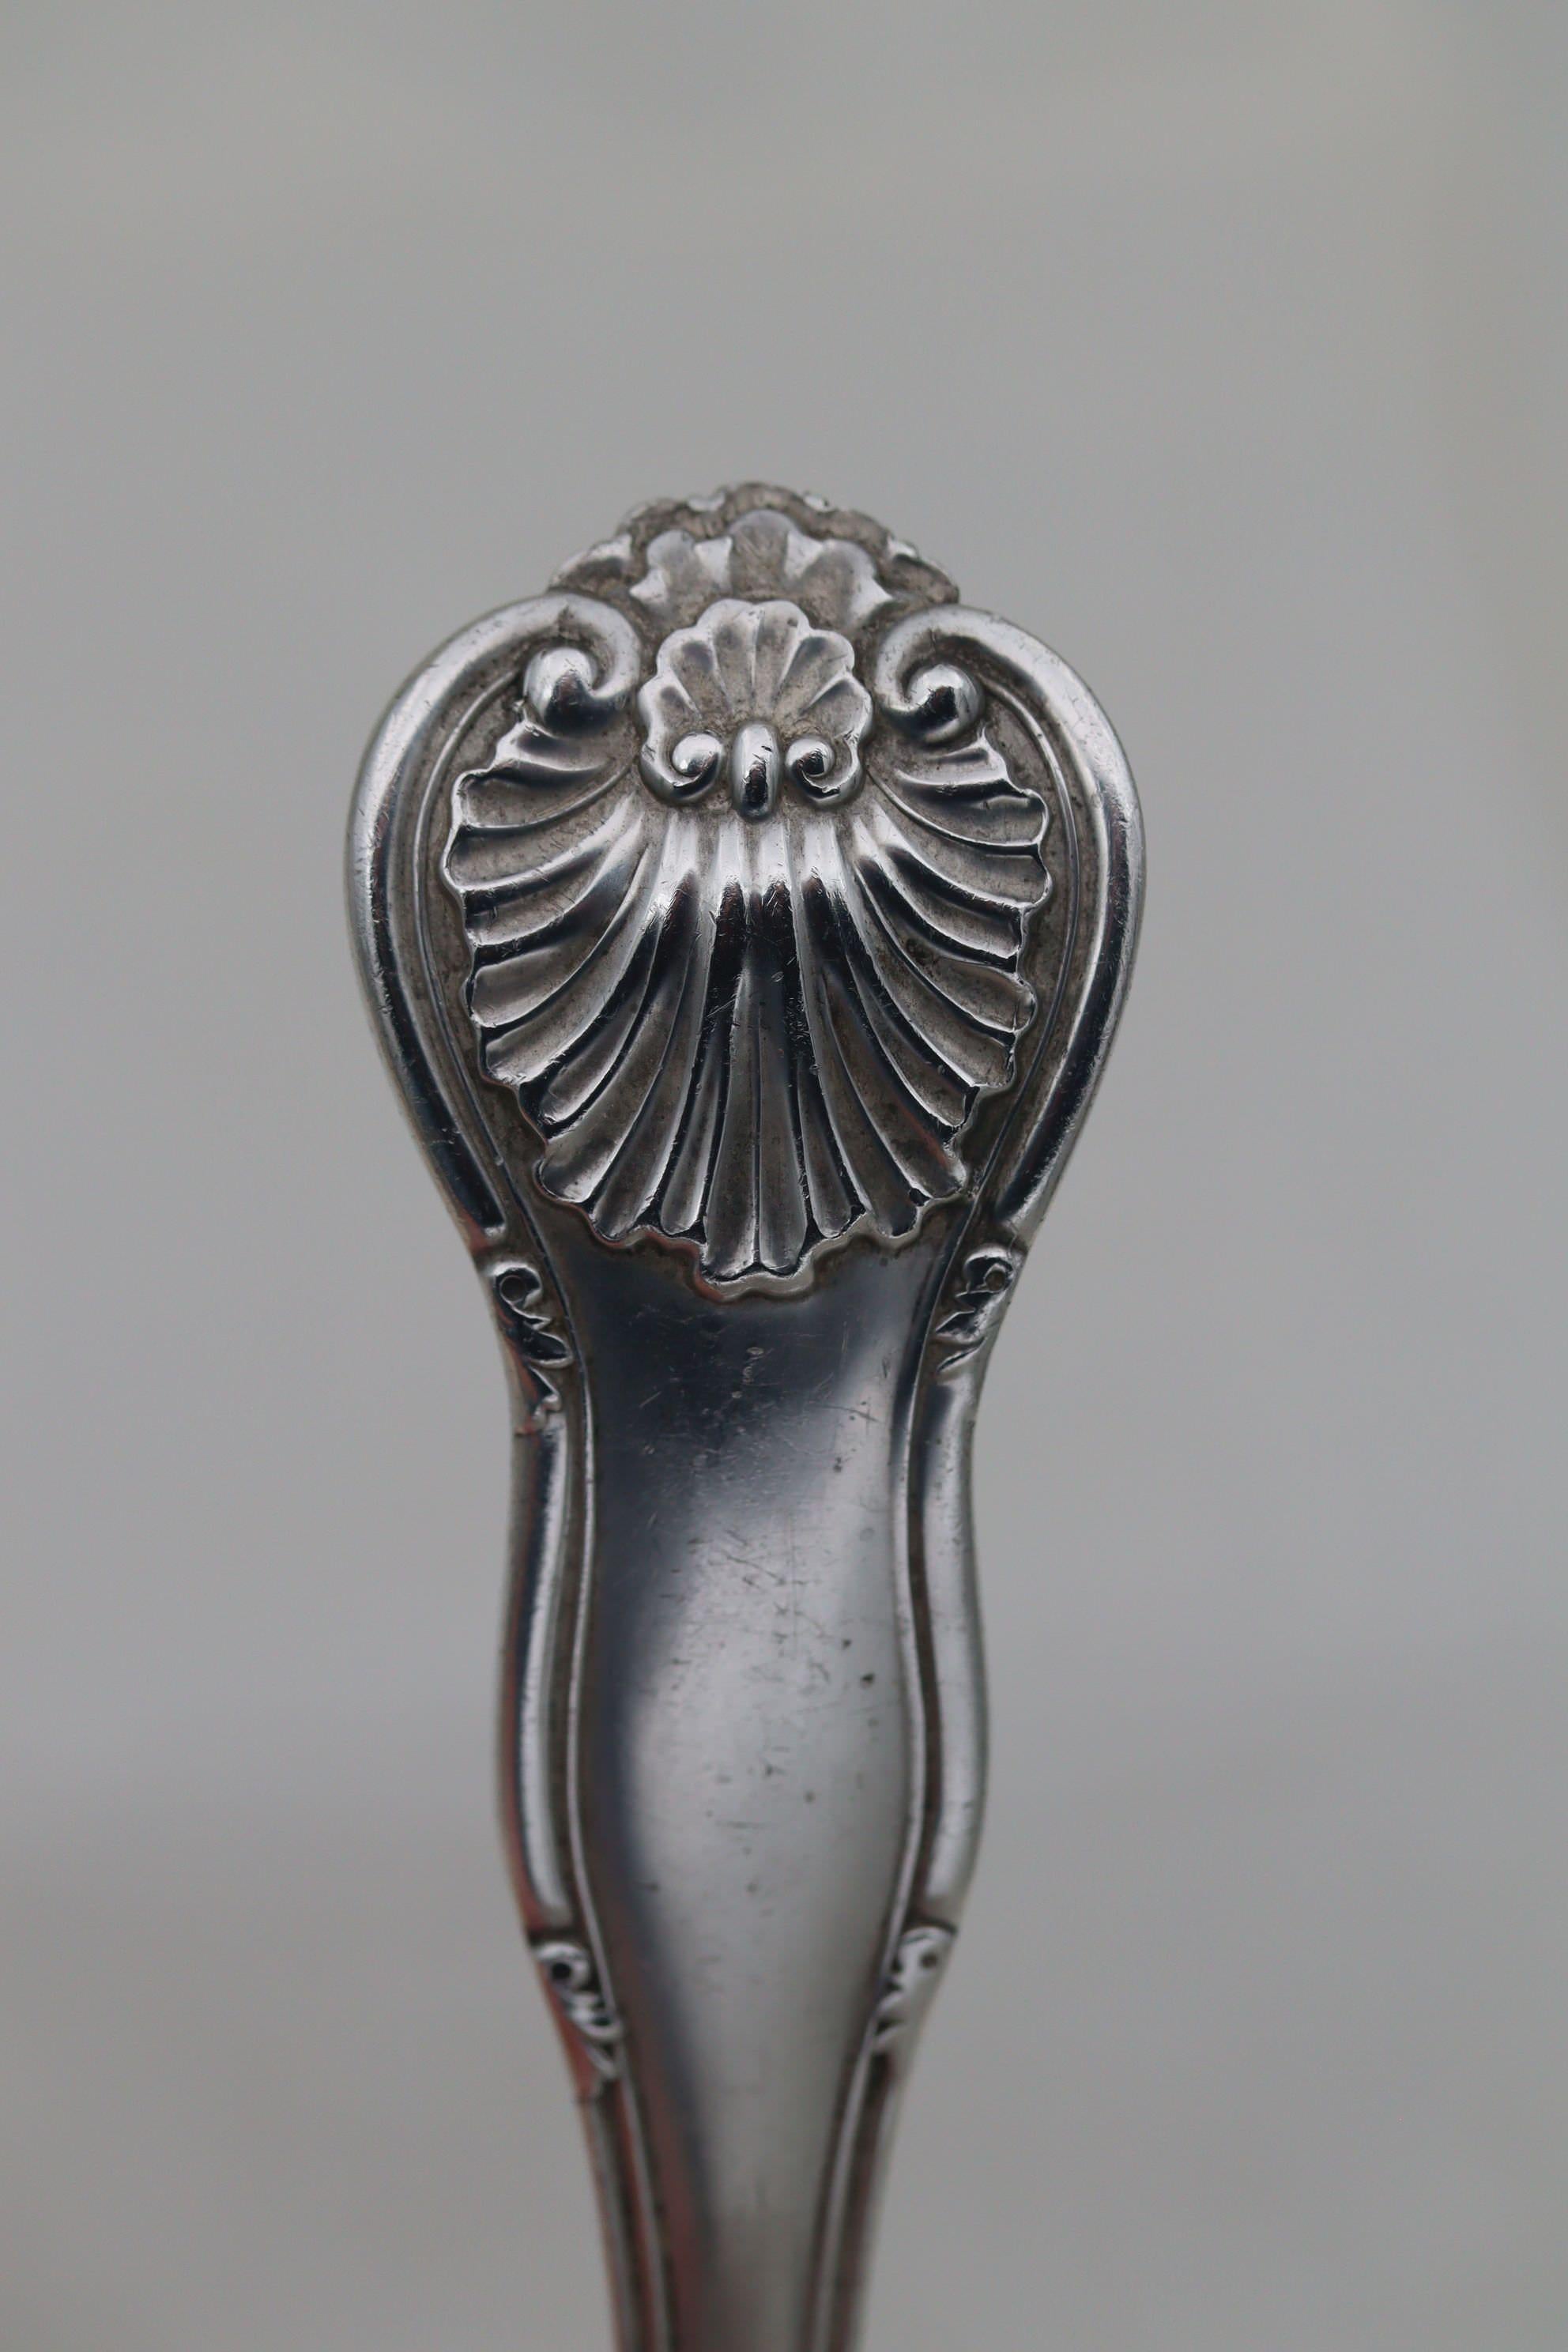 This good quality Edwardian sterling silver soup ladle was made in London in 1911 by the firm of Holland, Aldwinckle and Slater. The decoration is their version of an older pattern known as Hanoverian Military Thread with Shell, where the tip of the